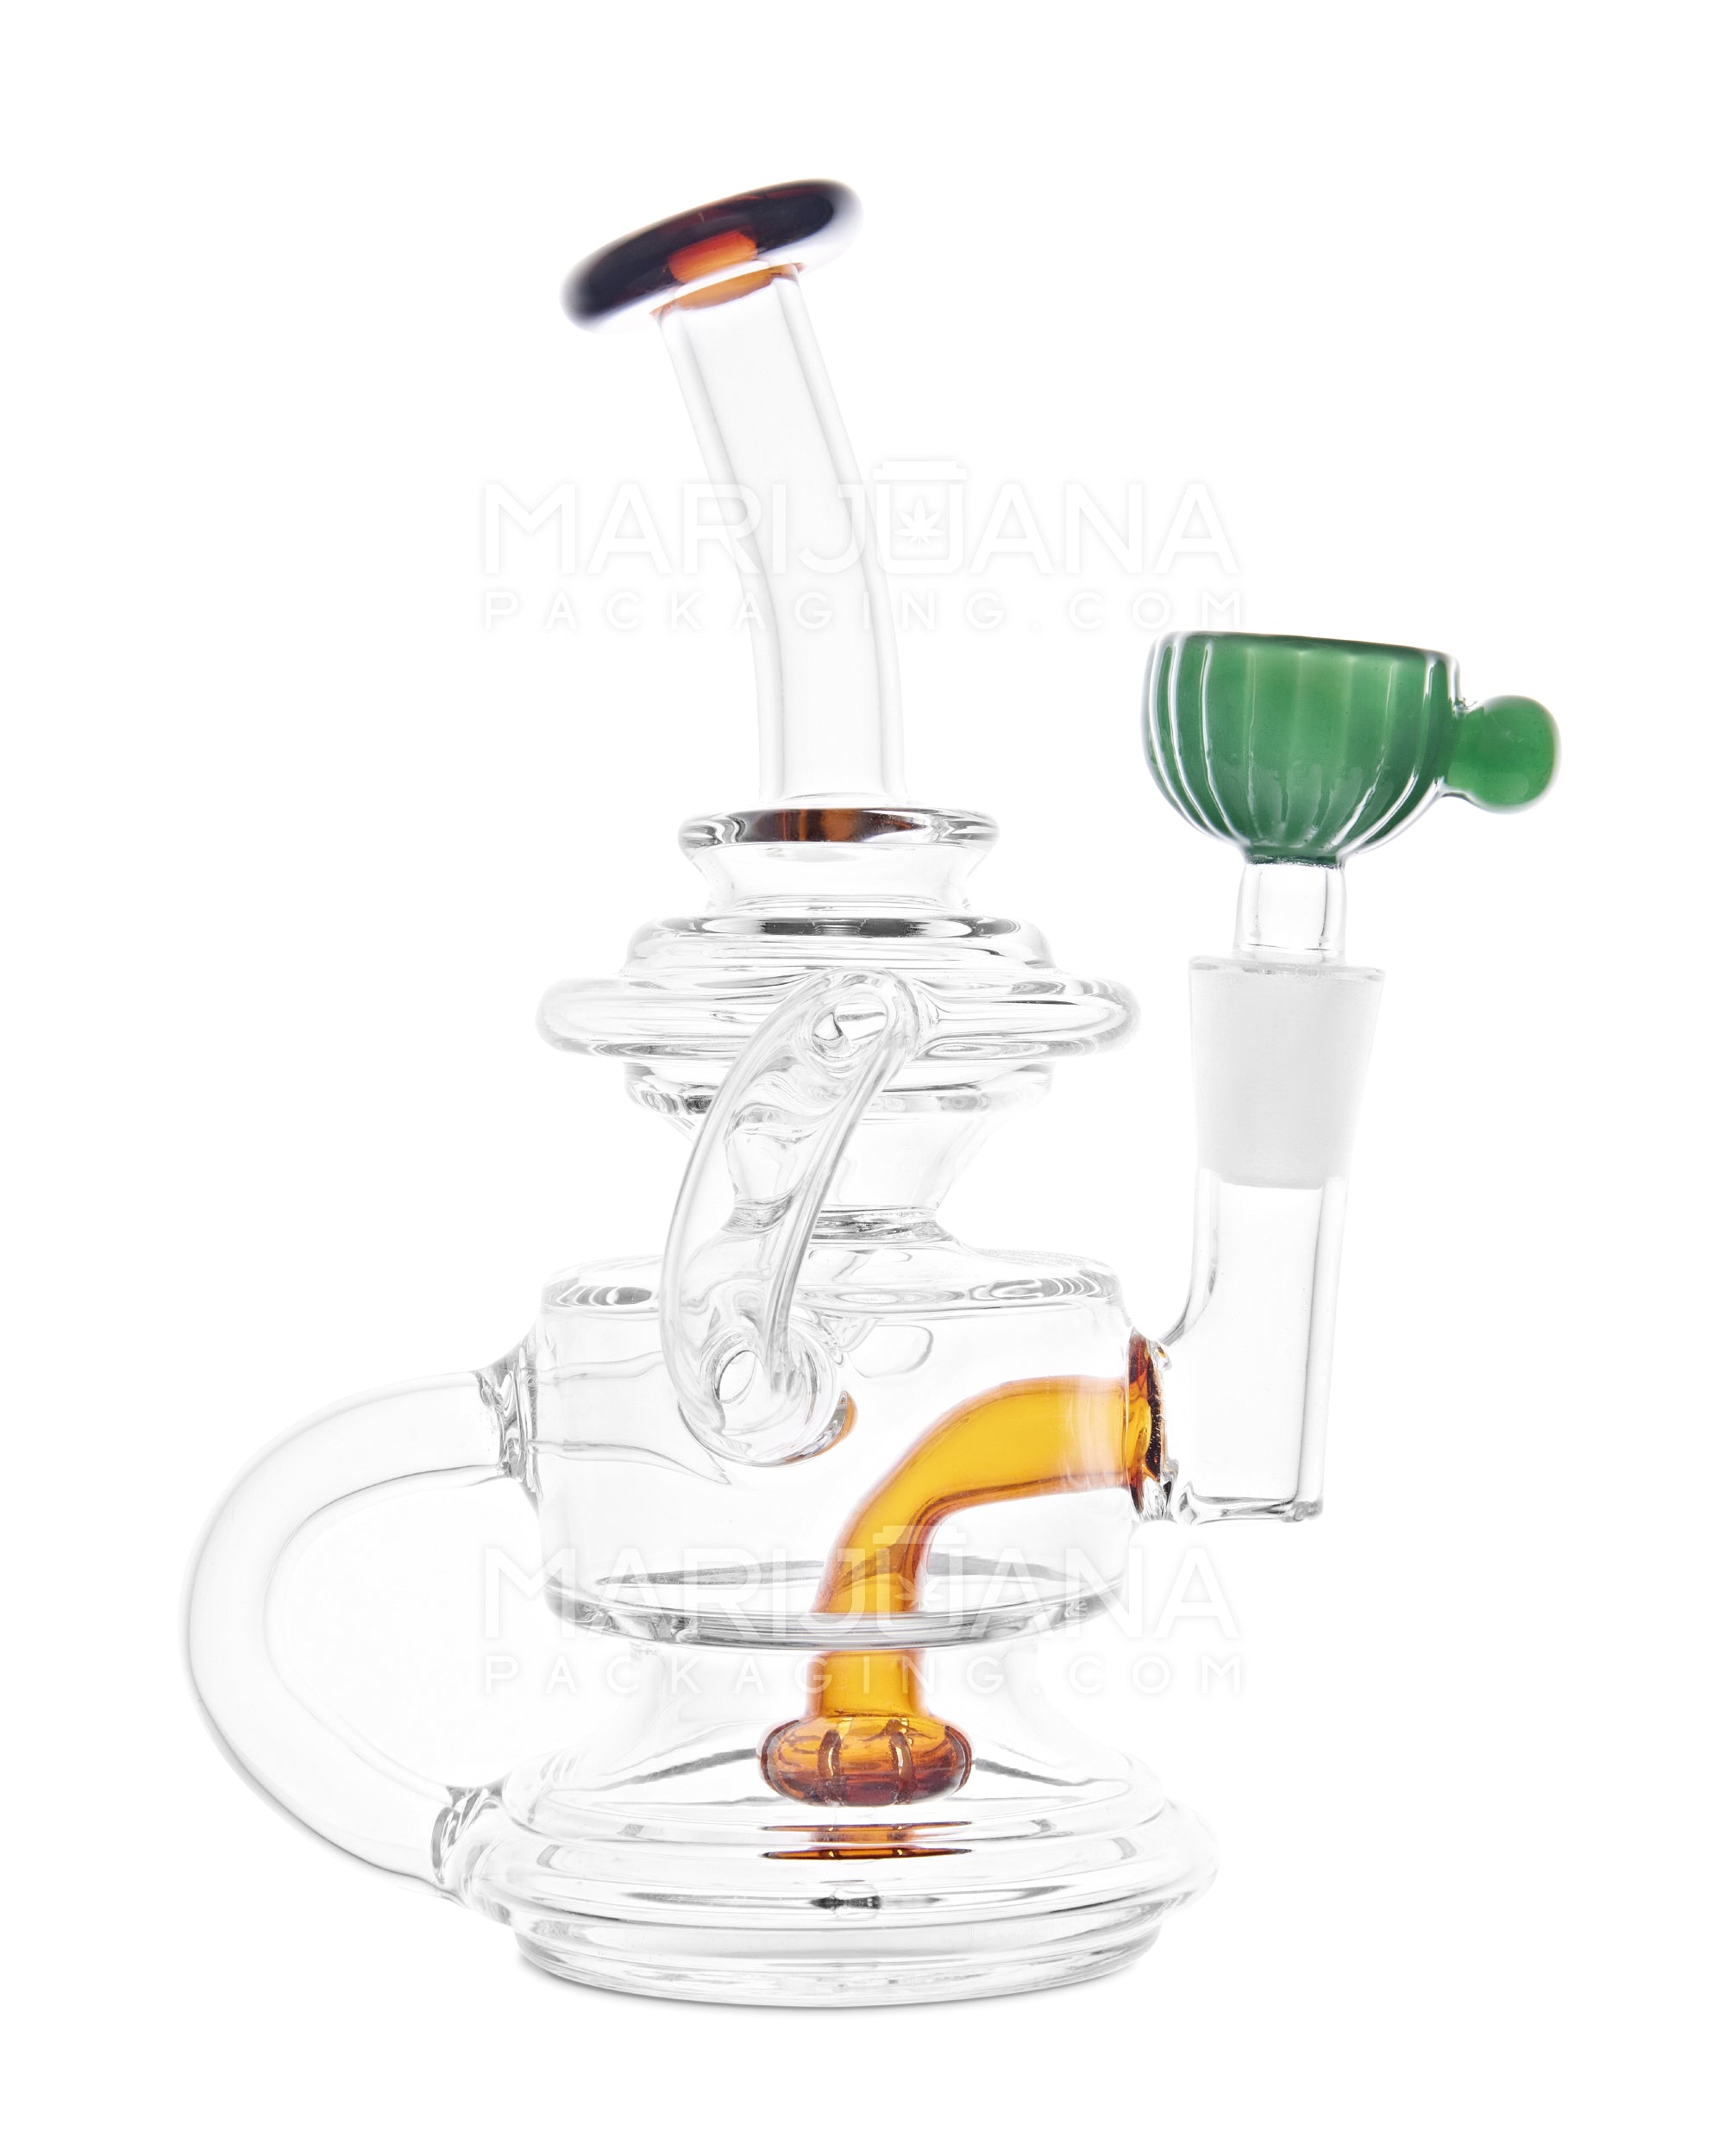 USA Glass | Bent Neck Dual Uptake Recycler Water Pipe w/ Showerhead Perc | 5.5in Tall - 10mm Bowl - Amber